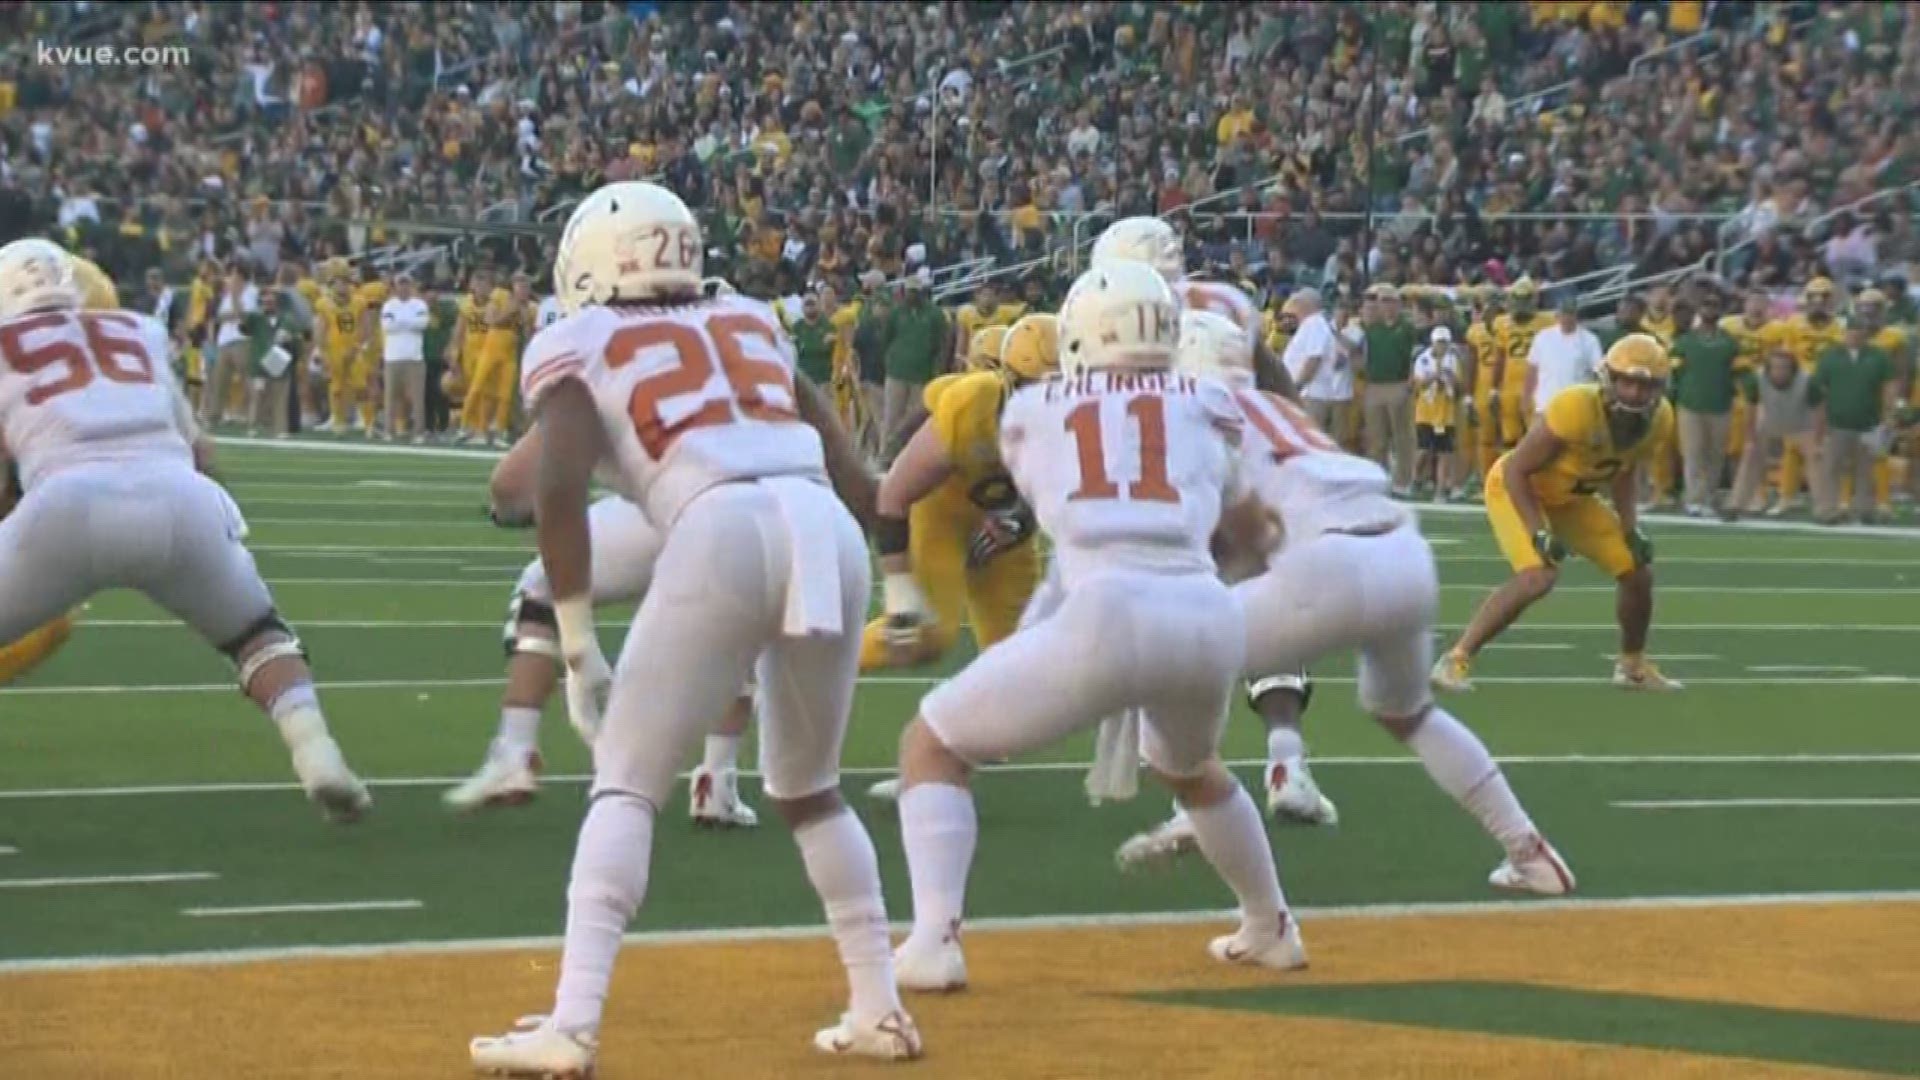 The Longhorns were not able to get a touchdown until the last second of the game, final score 24-10.